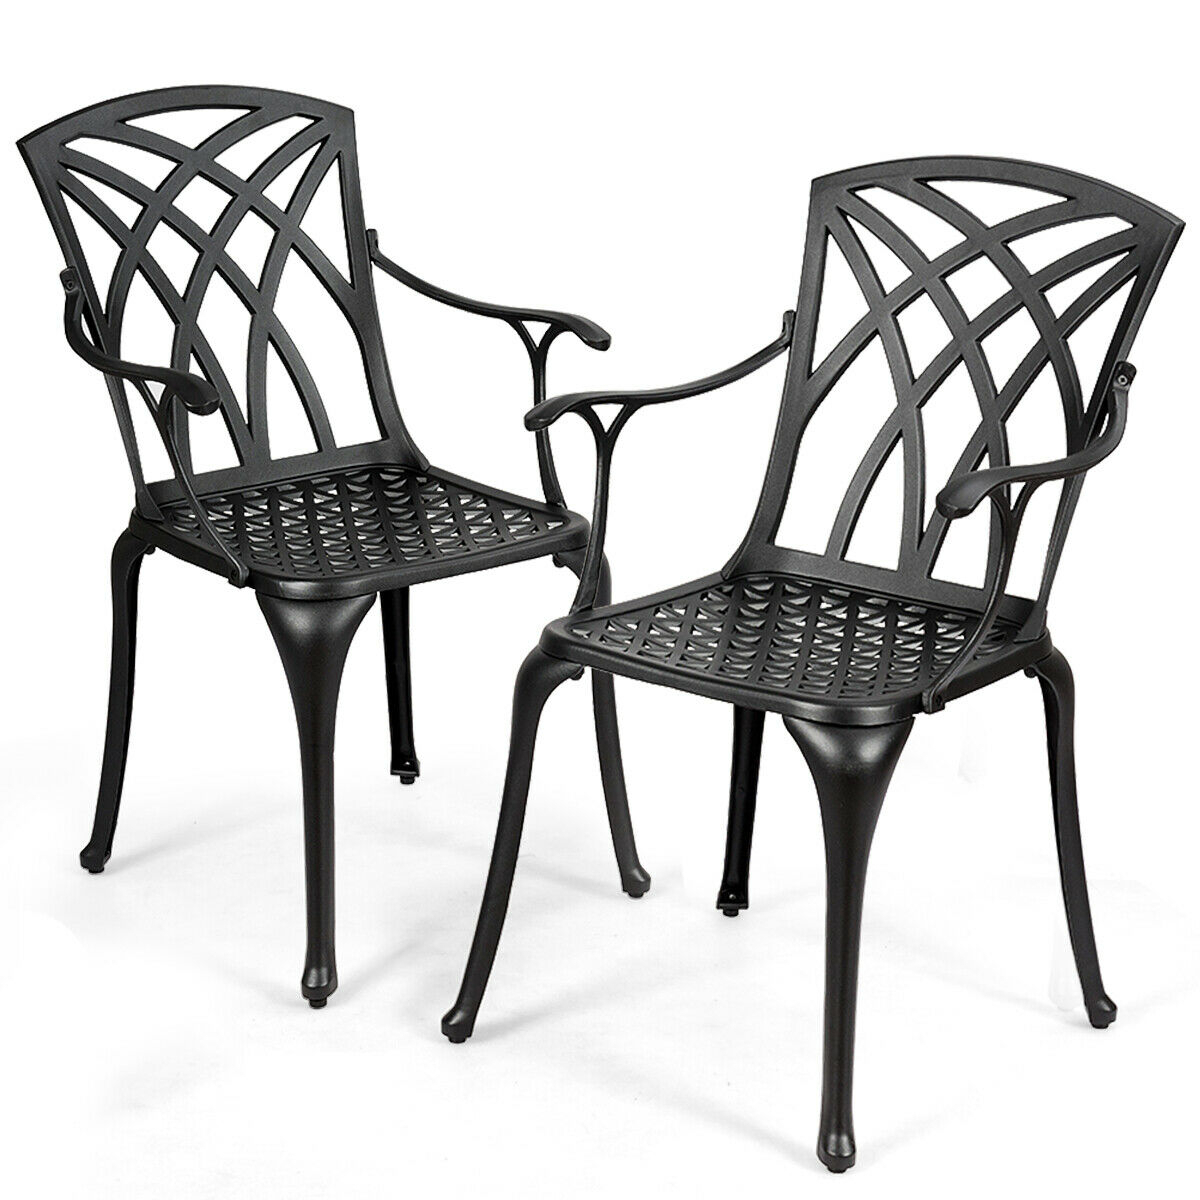 Set Of 2 Cast Aluminum Dining Chairs Durable Solid Construction W/Armrest Black